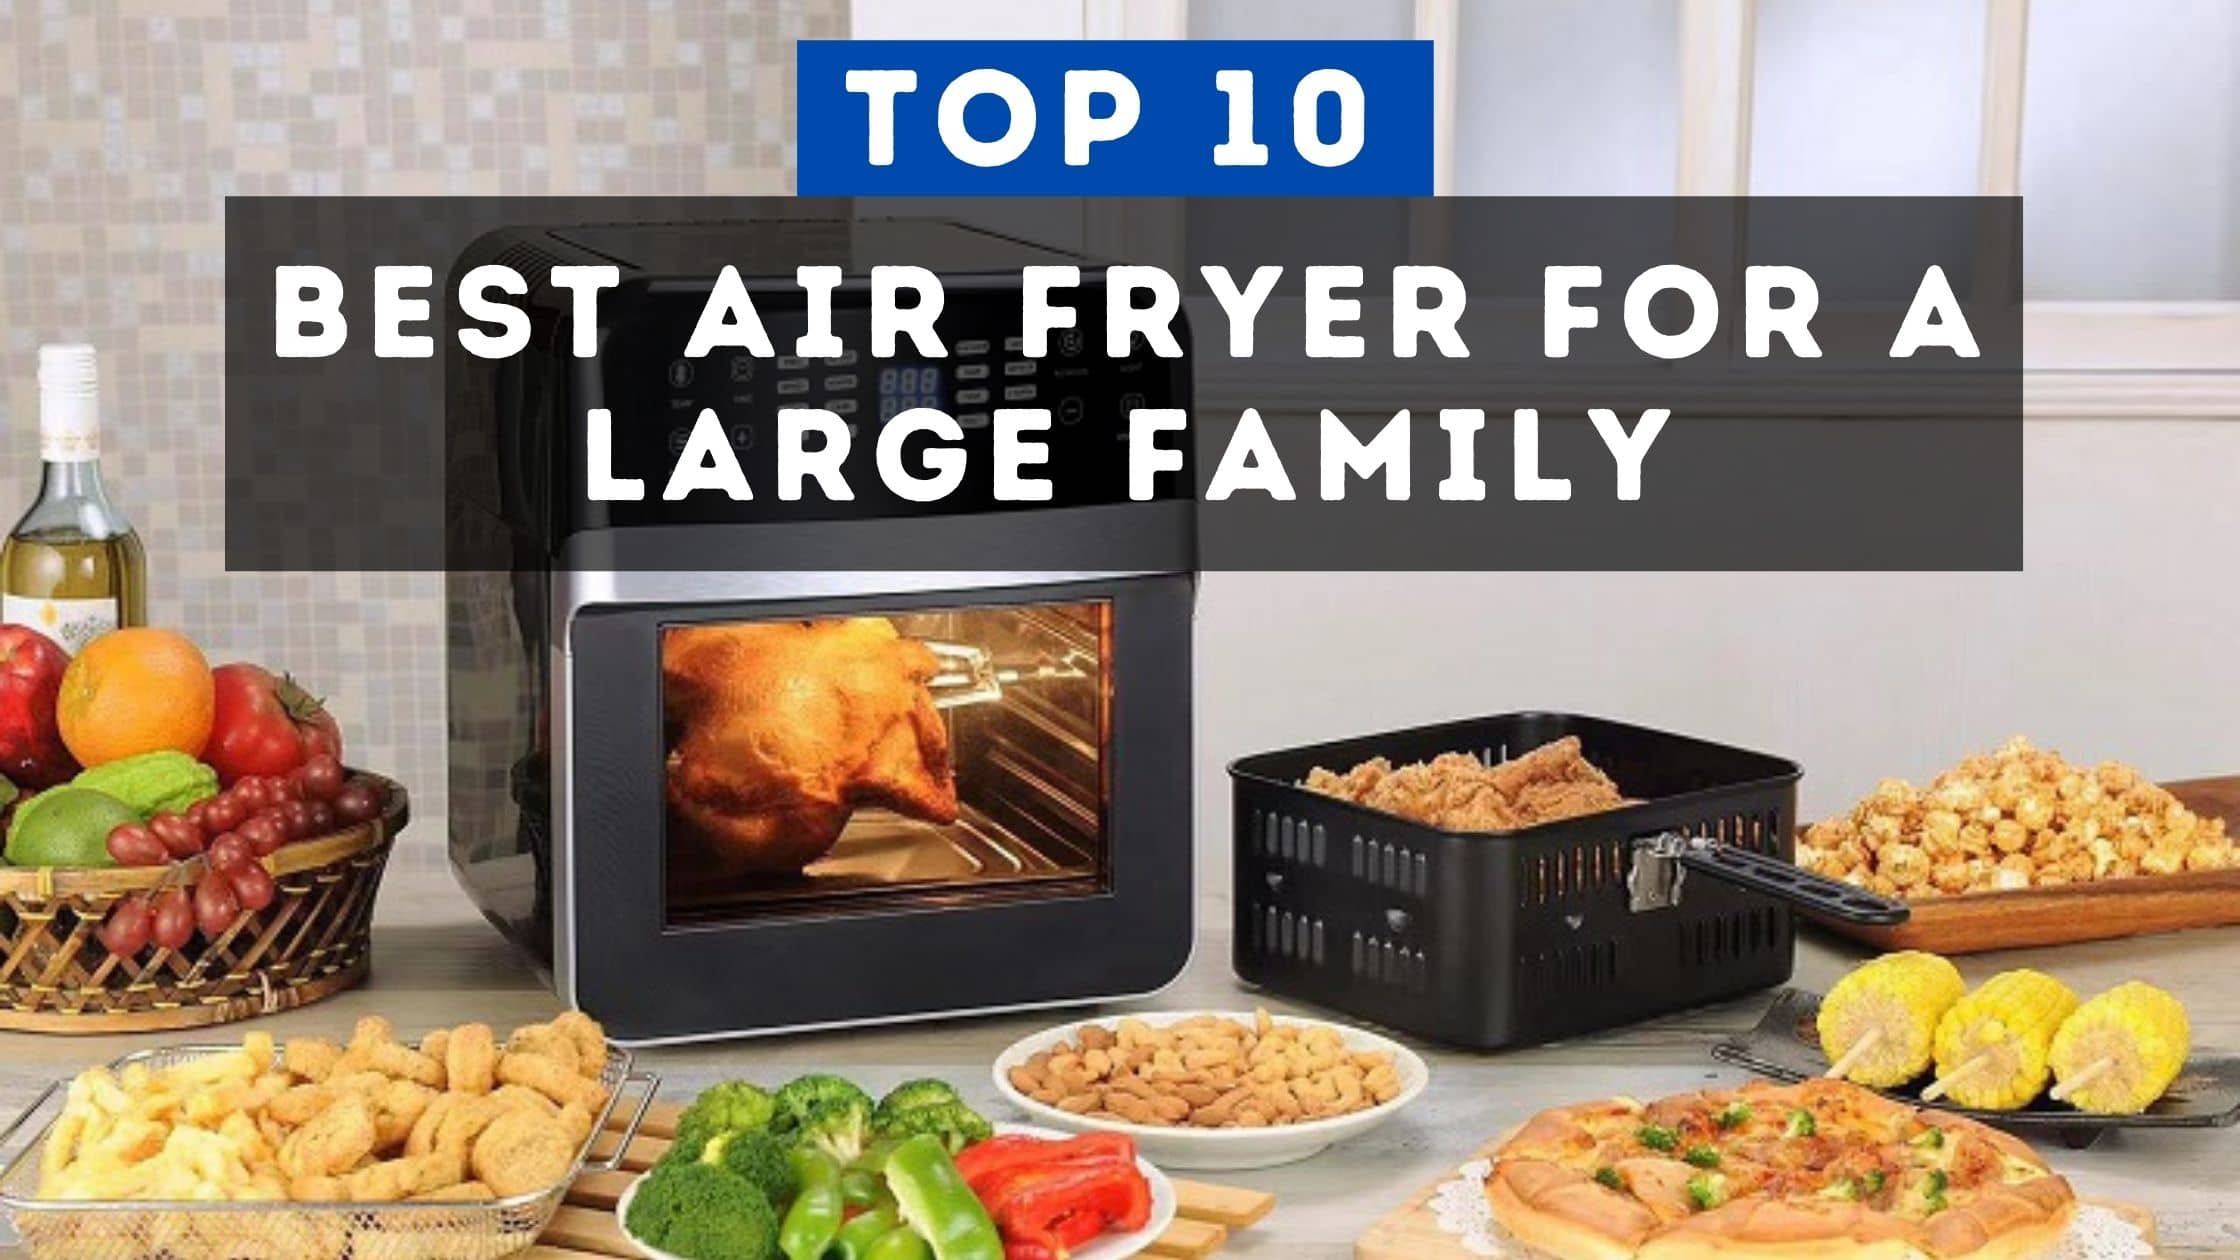 10-best-air-fryer-for-large-family-buyer-s-guide